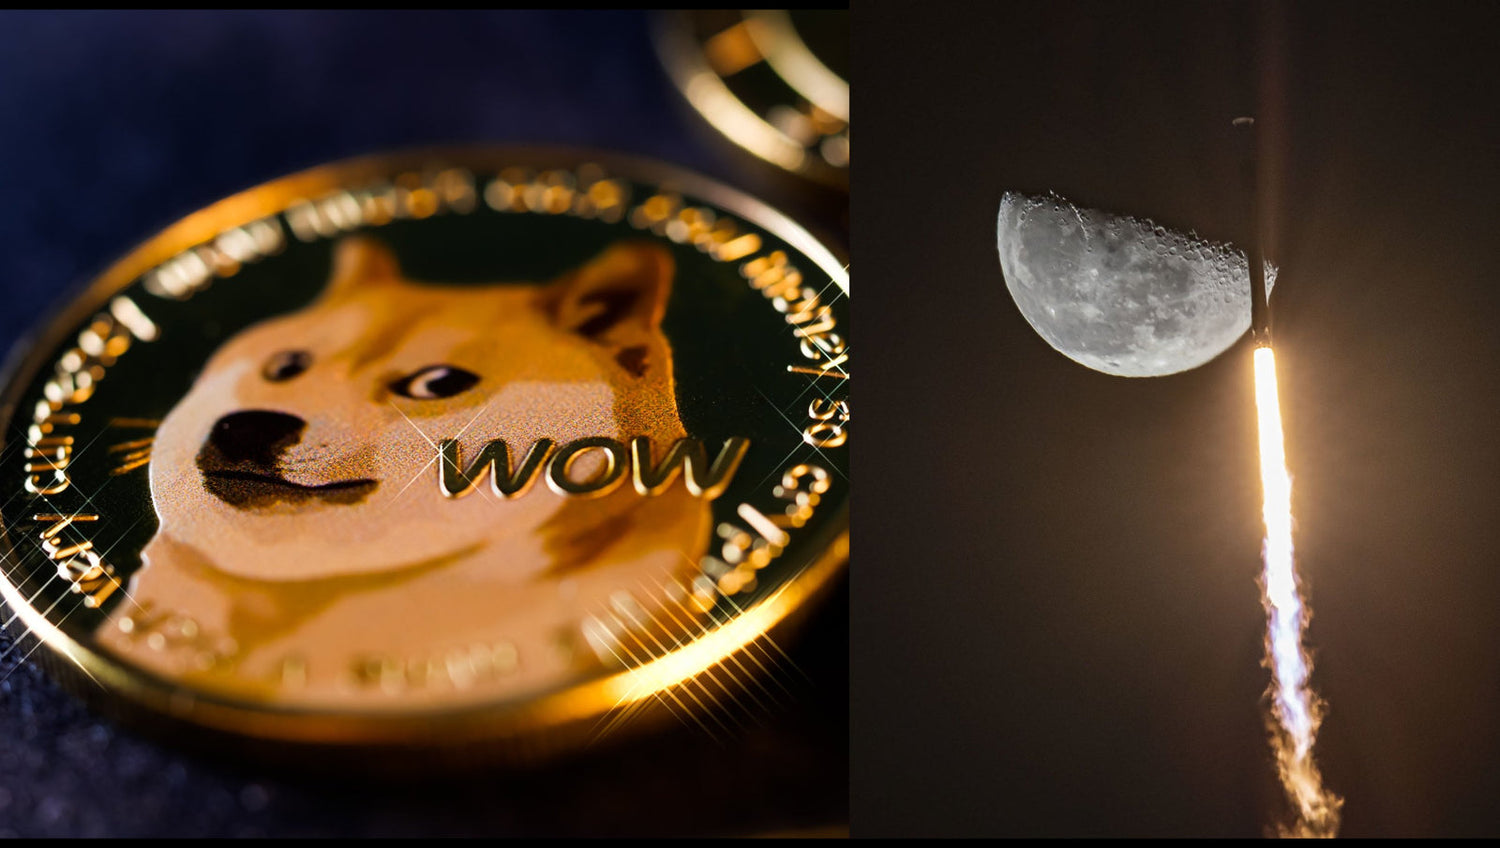 DOGE-1 SpaceX’s first mission paid entirely with Dogecoin could lift off to the Moon in December